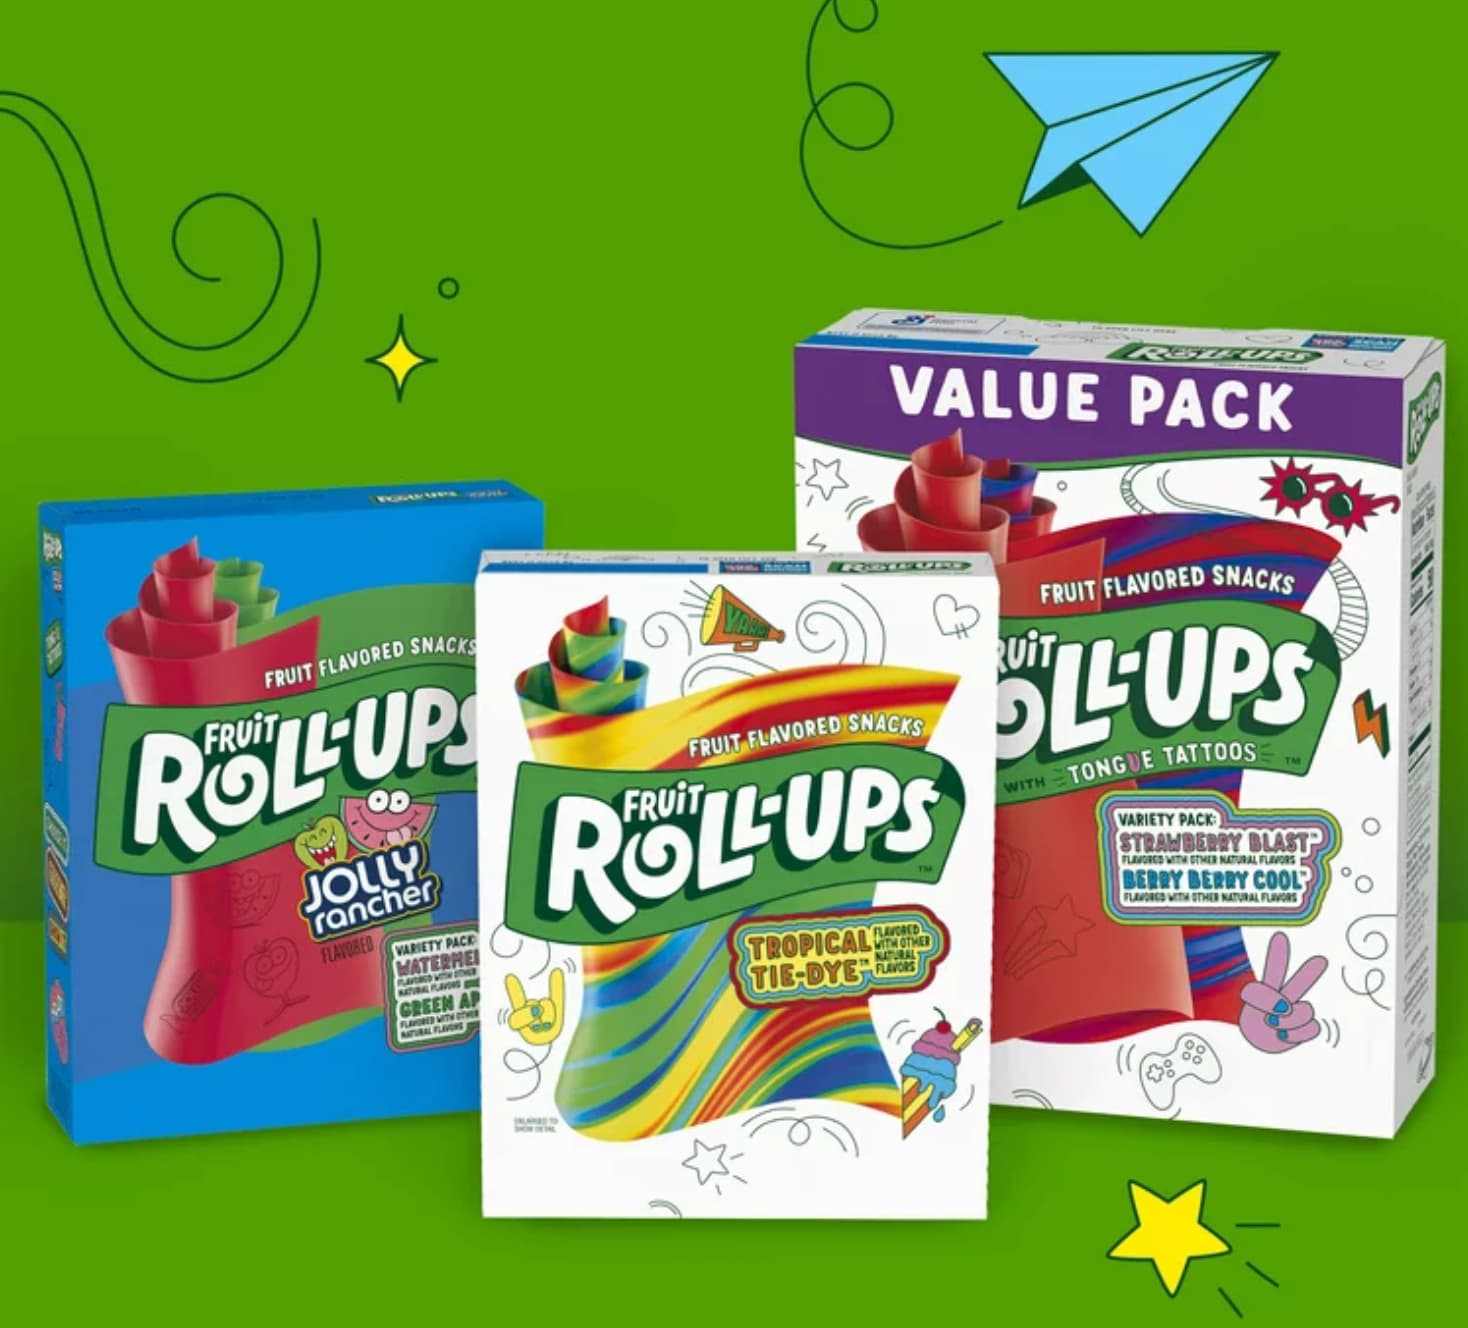 Snack - Stfurs Value Pack Fruit Fruit Flavored Snacks RollUp Ke Jolly rancher Flavored Variety Pack Materhe Green Ap Flavored With Other Natural Flavors R2IEURO Fruit Flavored Snacks RolUps Flavored Natural Tropical With Other TieDye Fruit Flavored Snacks